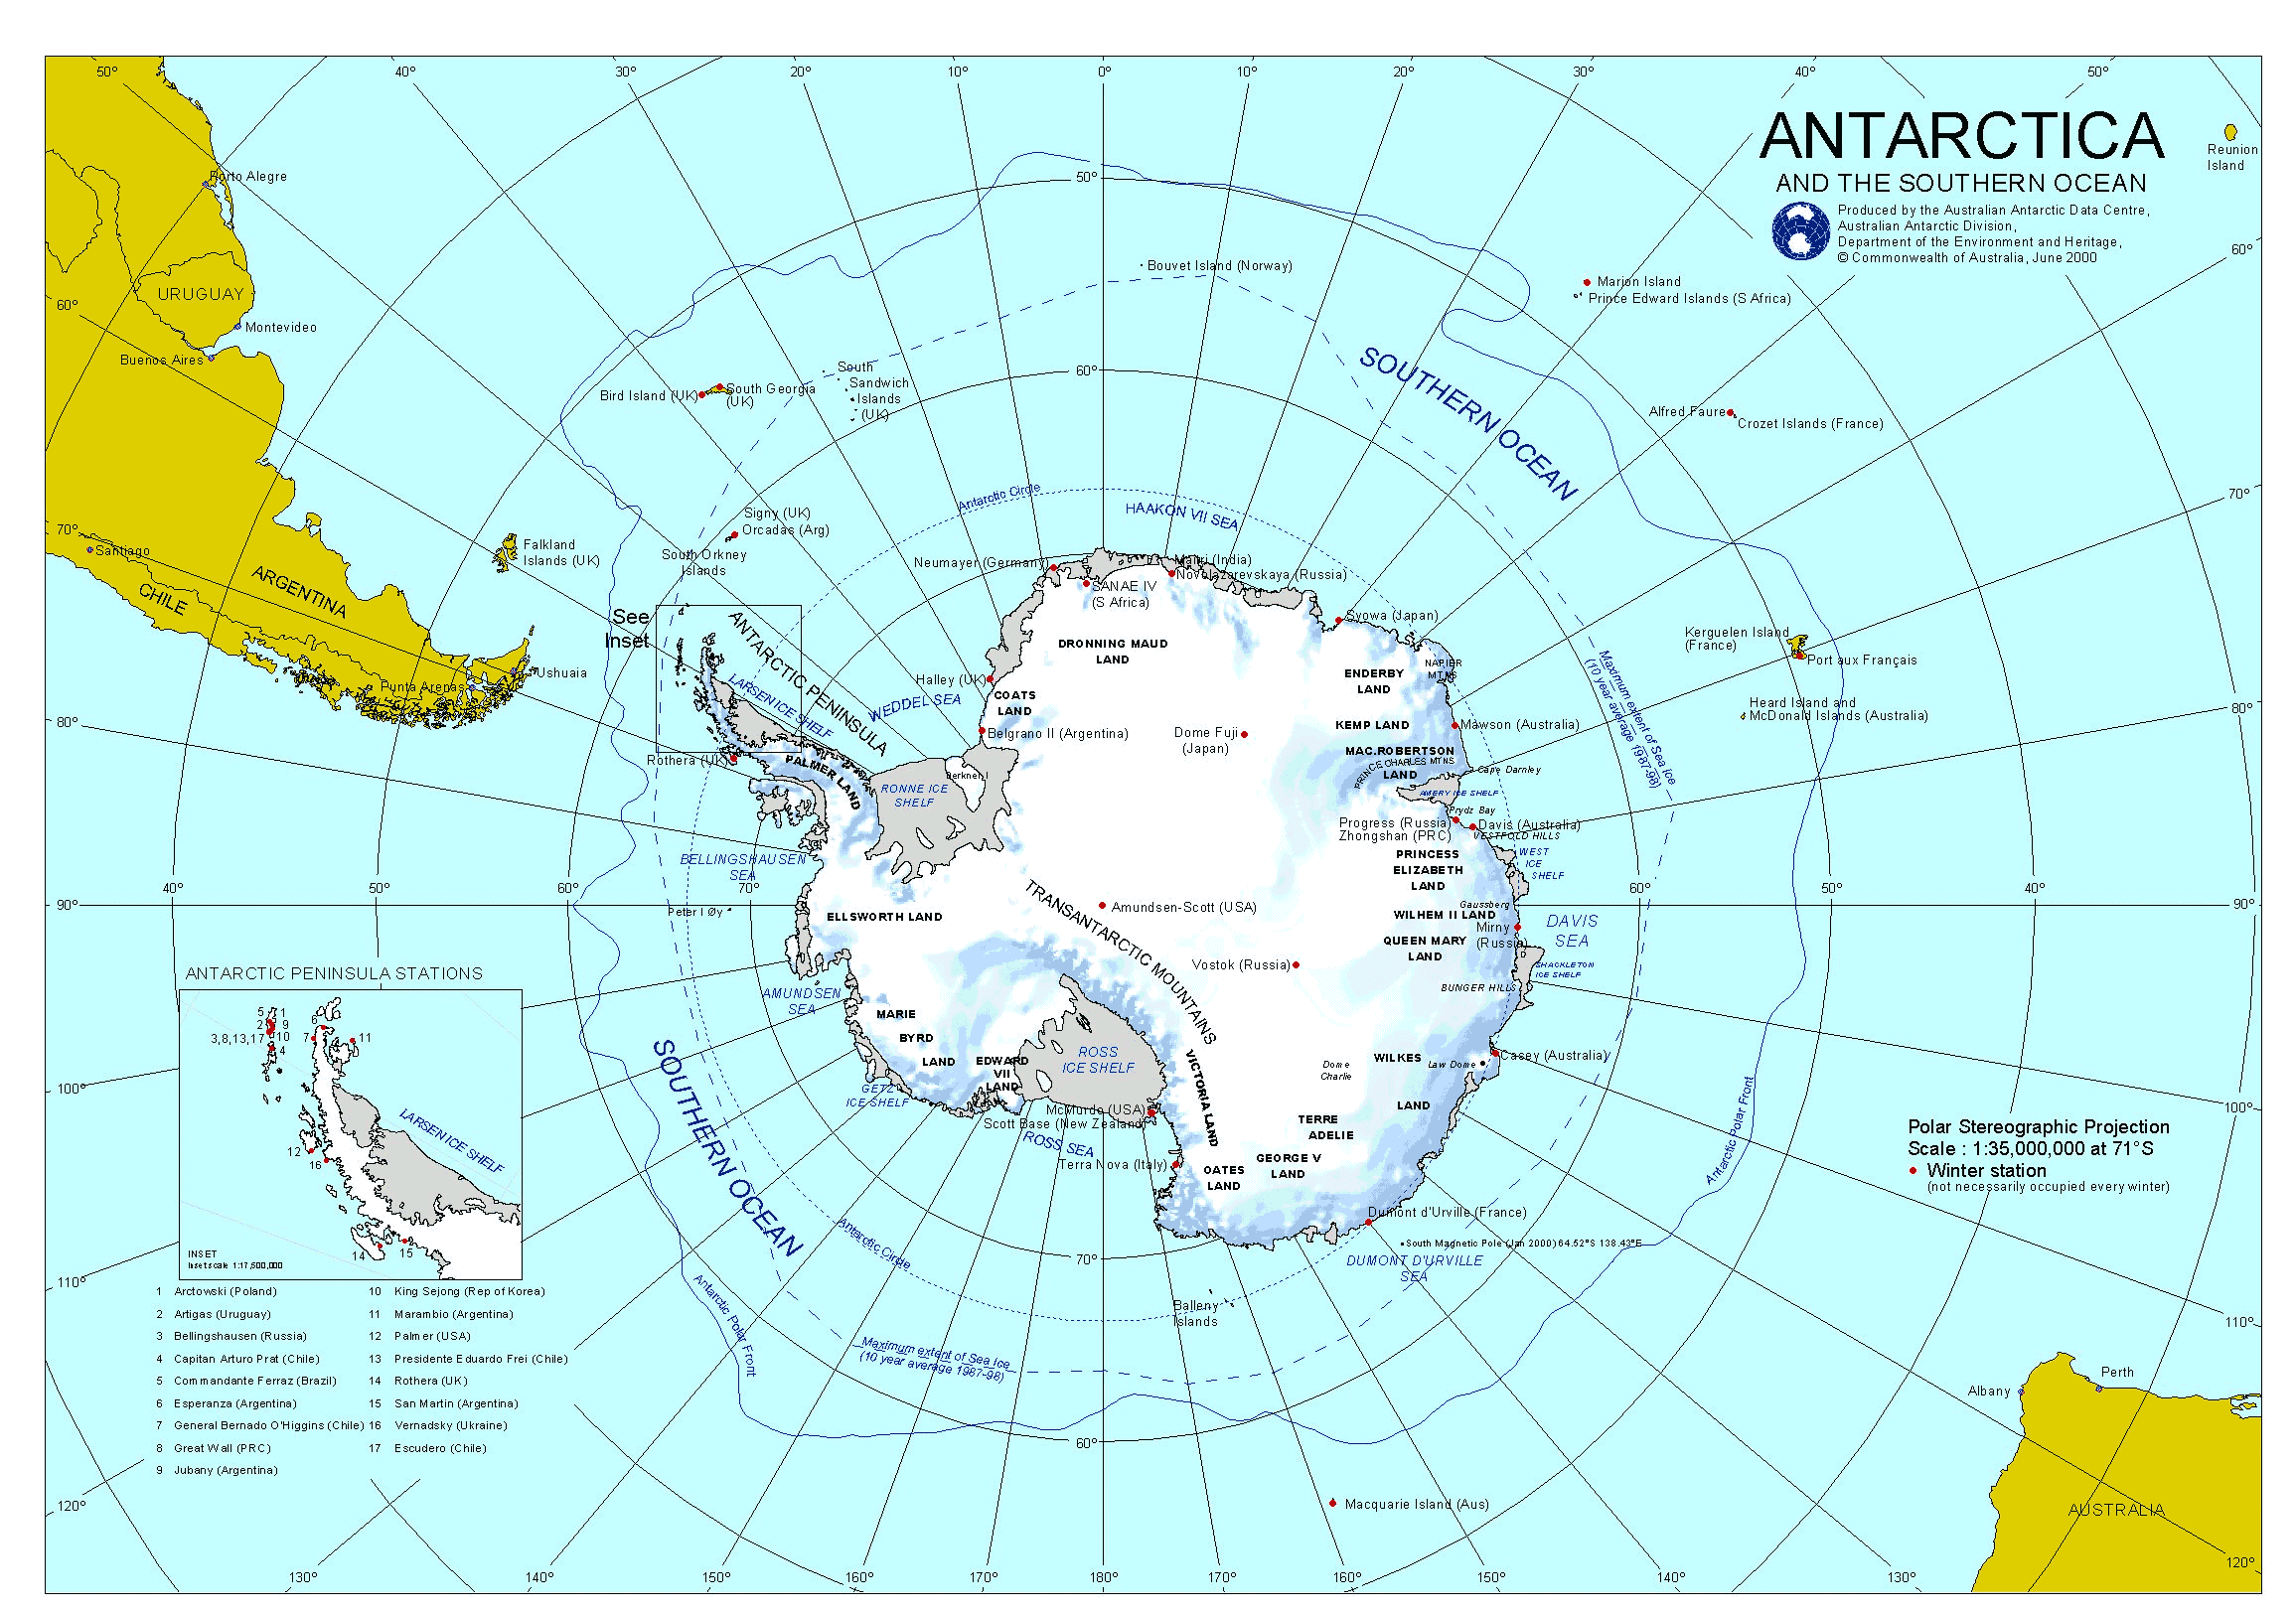 Antarctica physical map - Full size | Gifex